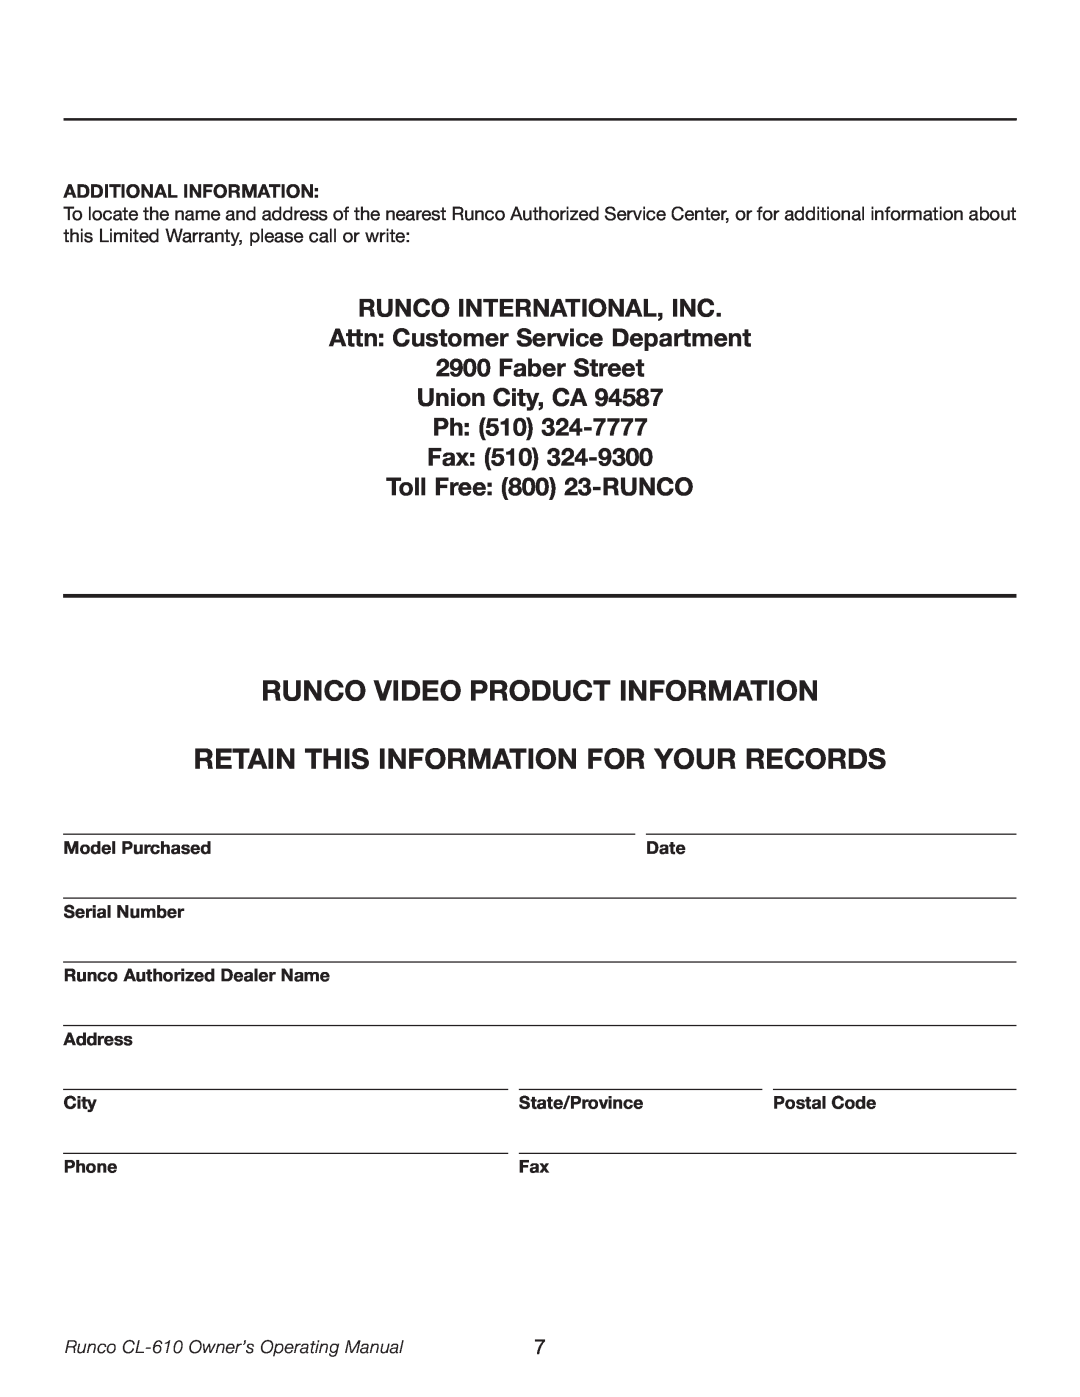 Runco CL-610LT Runco Video Product Information, Retain This Information For Your Records, Toll Free 800 23-RUNCO, Date 